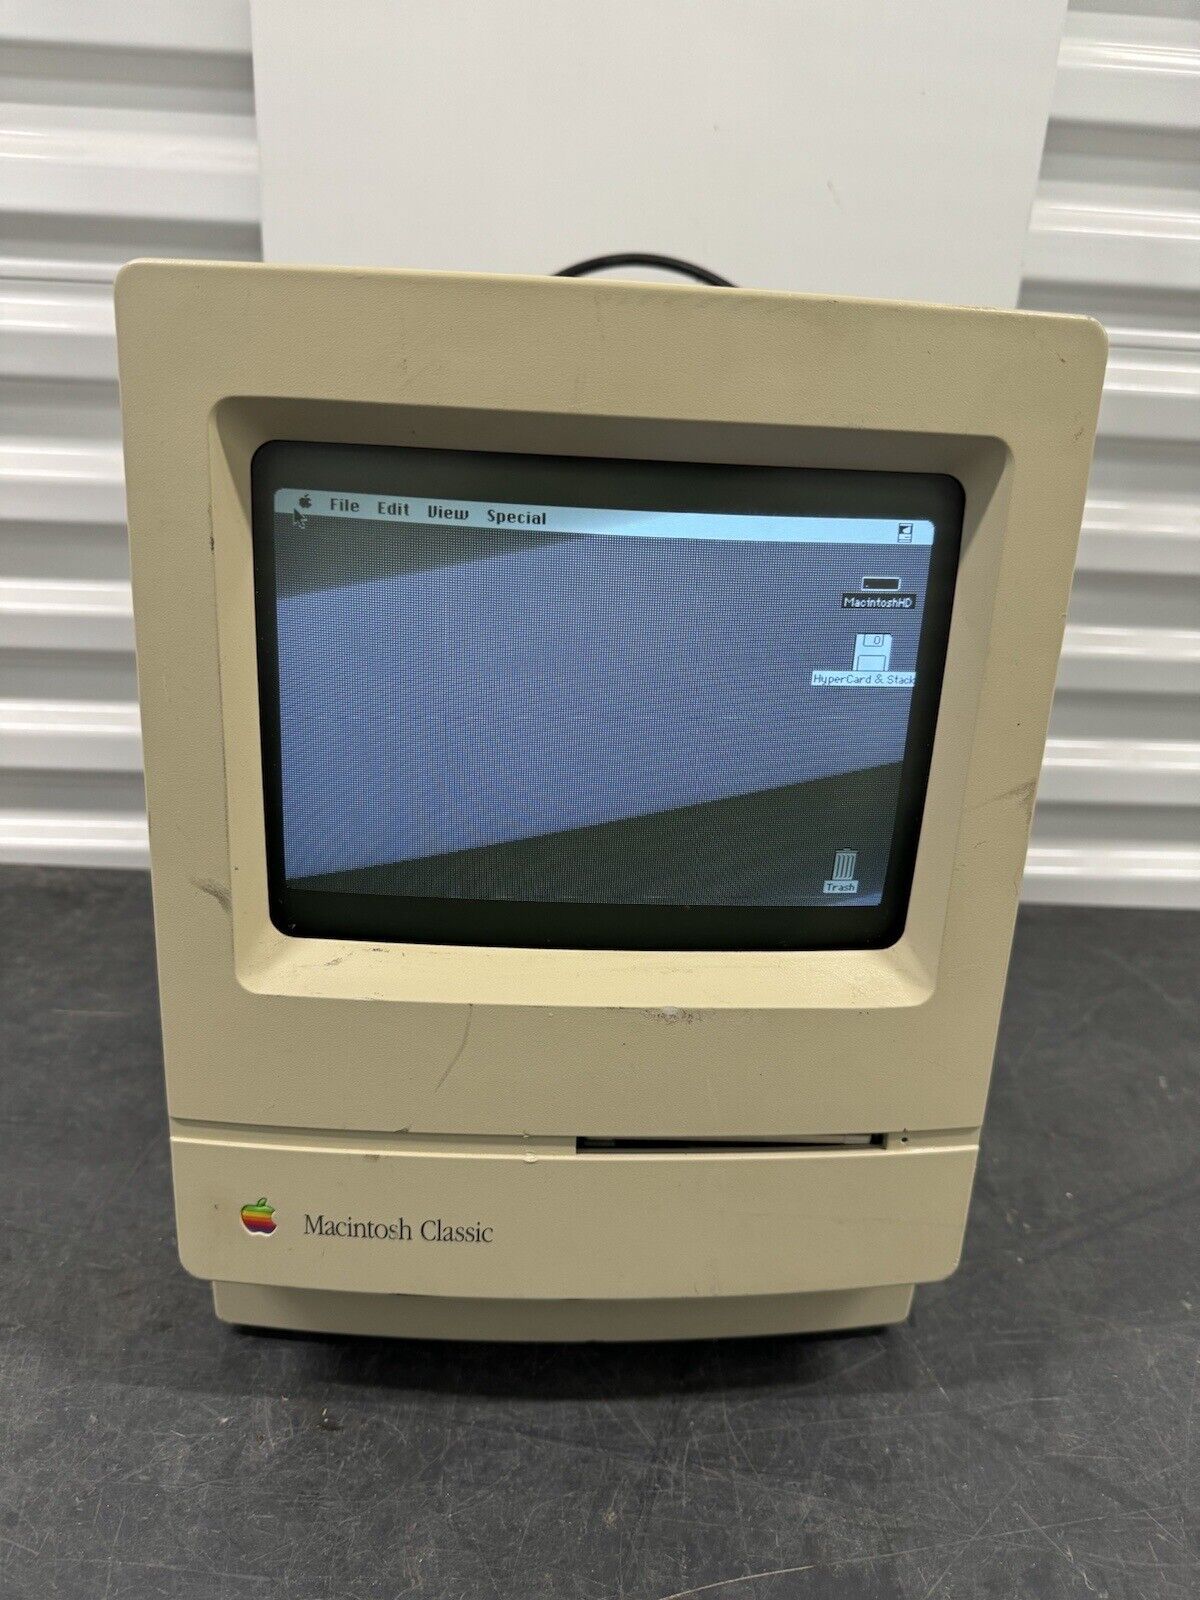 Apple Macintosh Classic Model M1420 Vintage Computer Fully Working